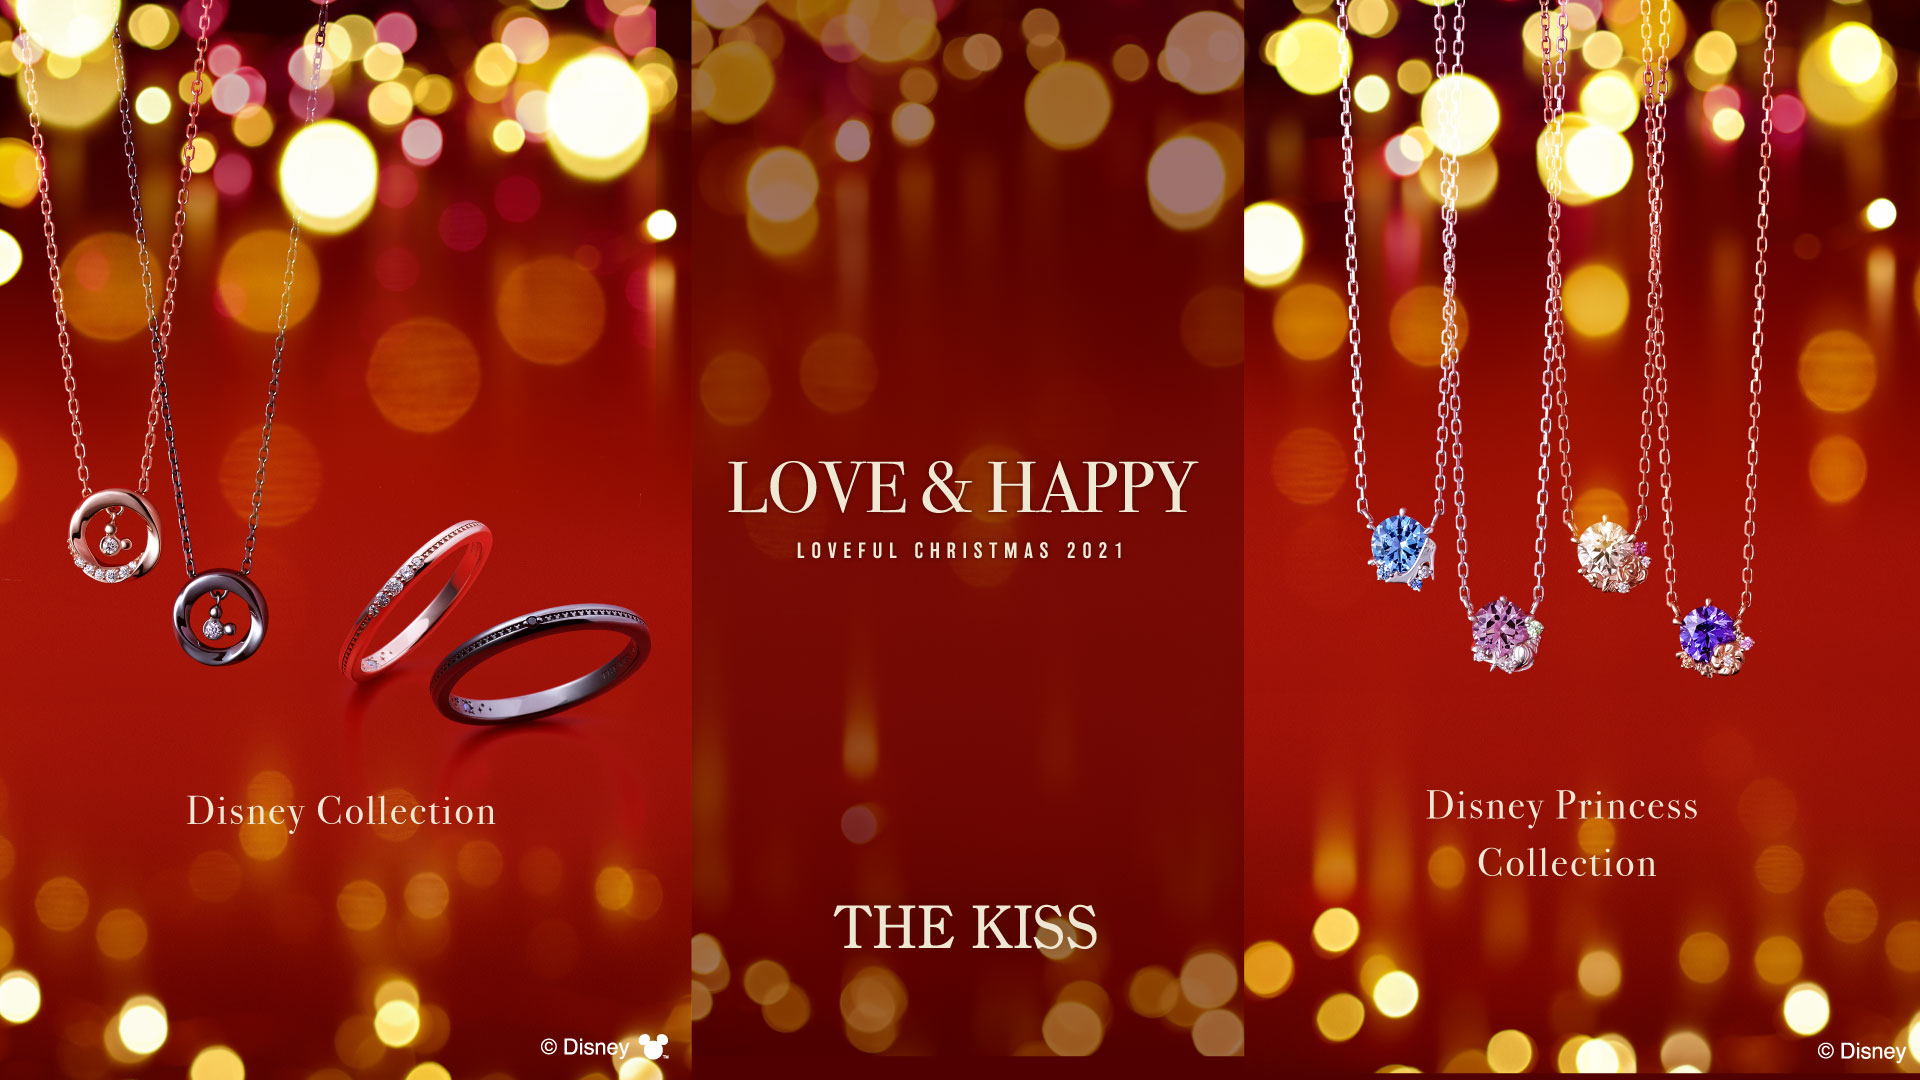 the kiss クリスマス限定商品！！！！